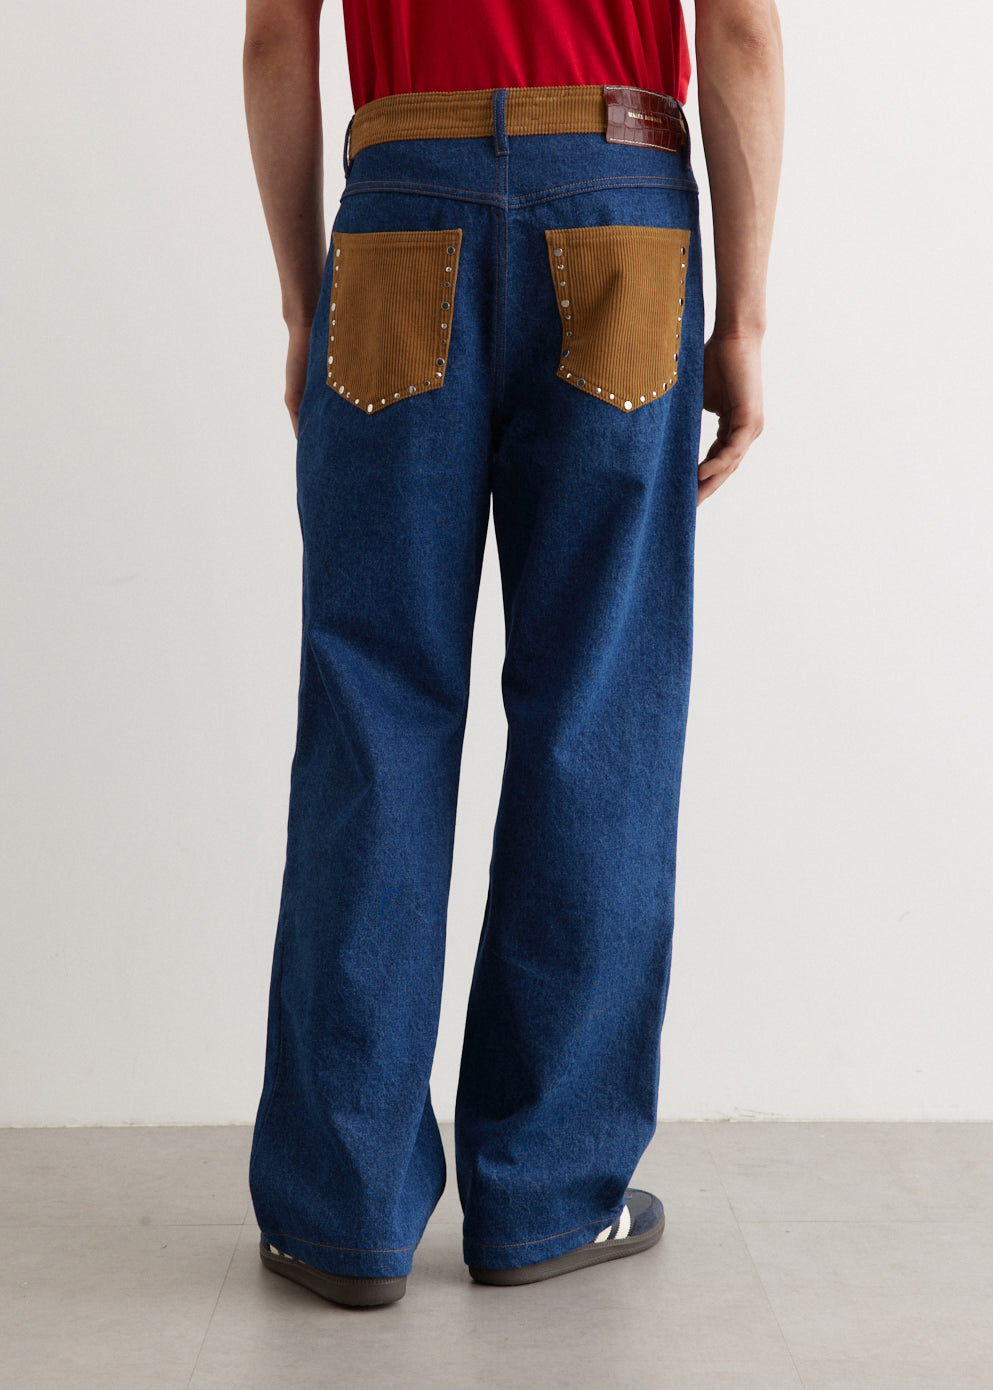 Dub Contrast waistband jeans in blue - Wales Bonner